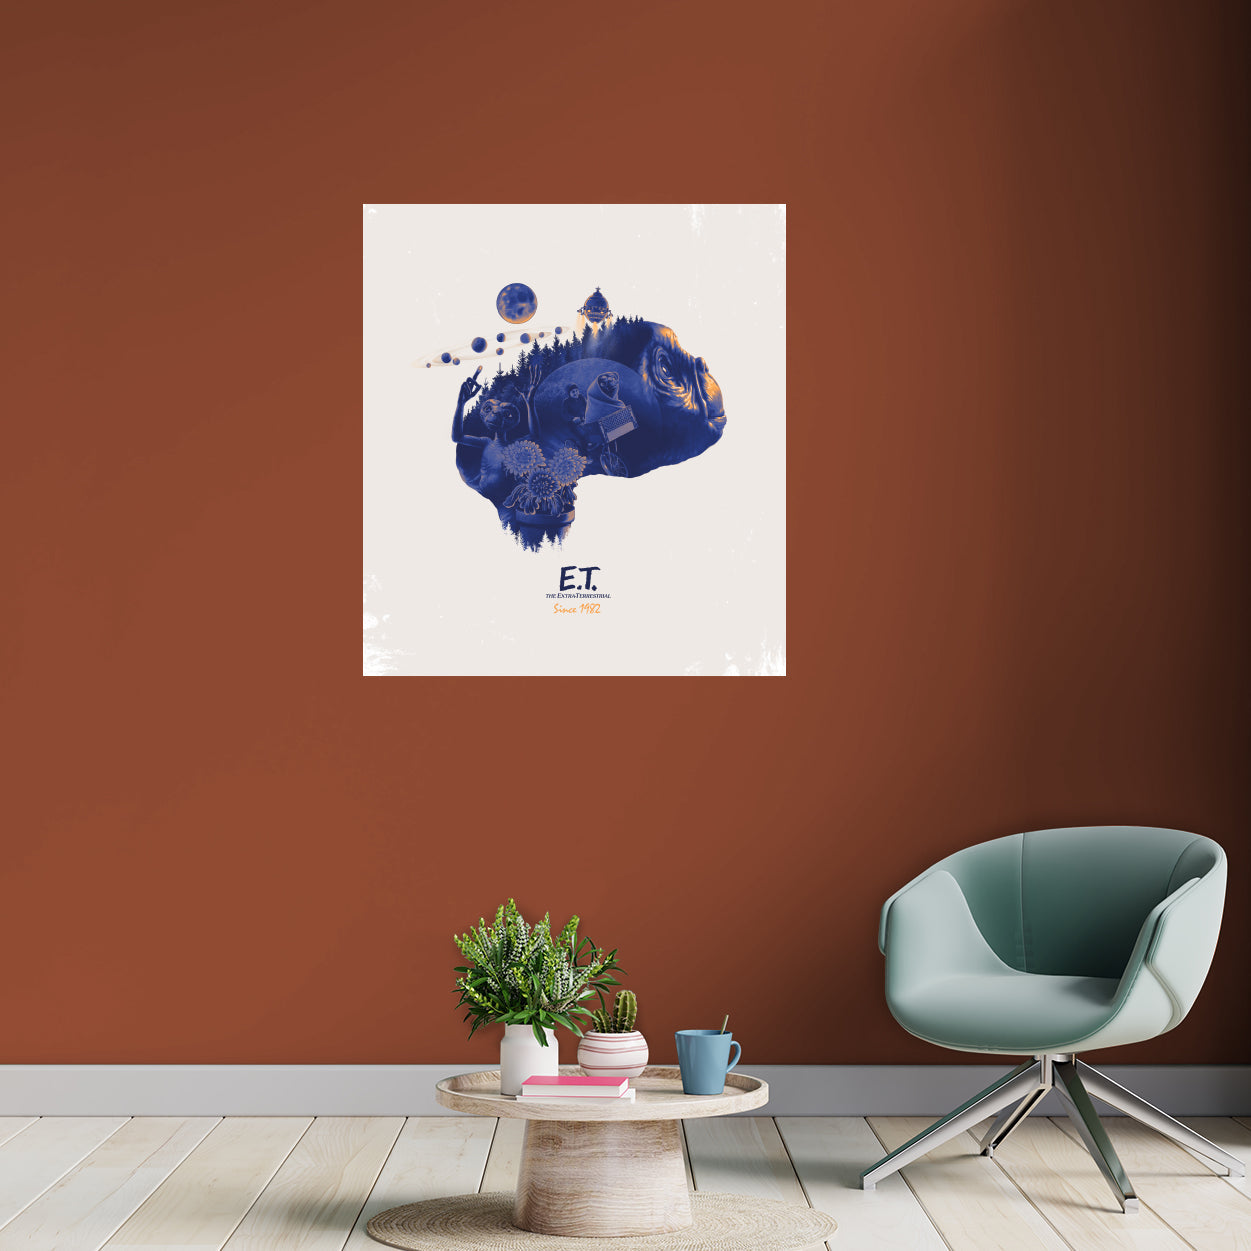 E.T.: E.T. Silhouette Compilation 40th Anniversary Graphic Poster - Officially Licensed NBC Universal Removable Adhesive Decal